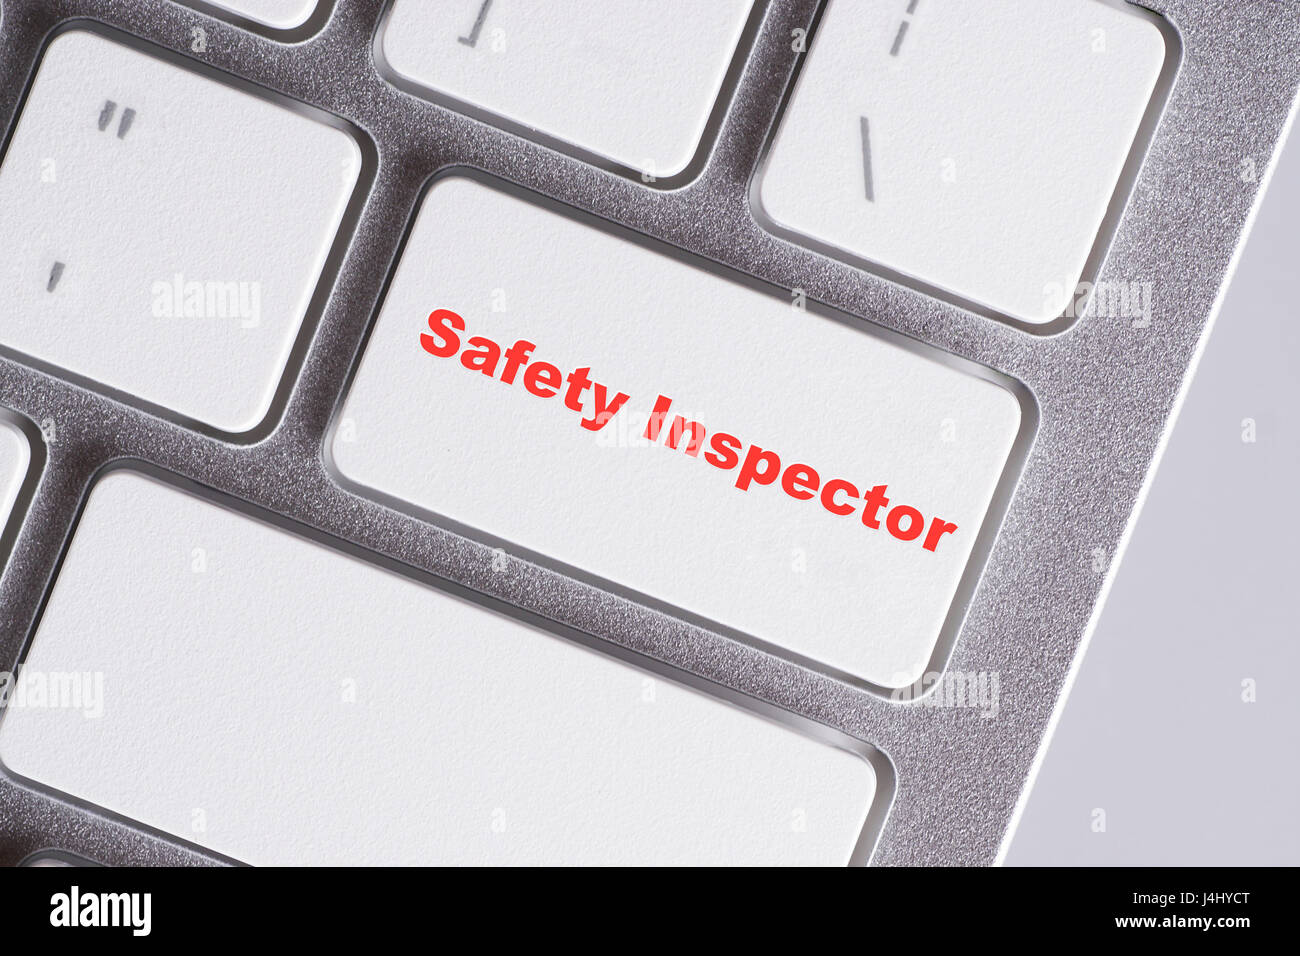 'Safety inspector' red words on white keyboard - online, education and business concept Stock Photo